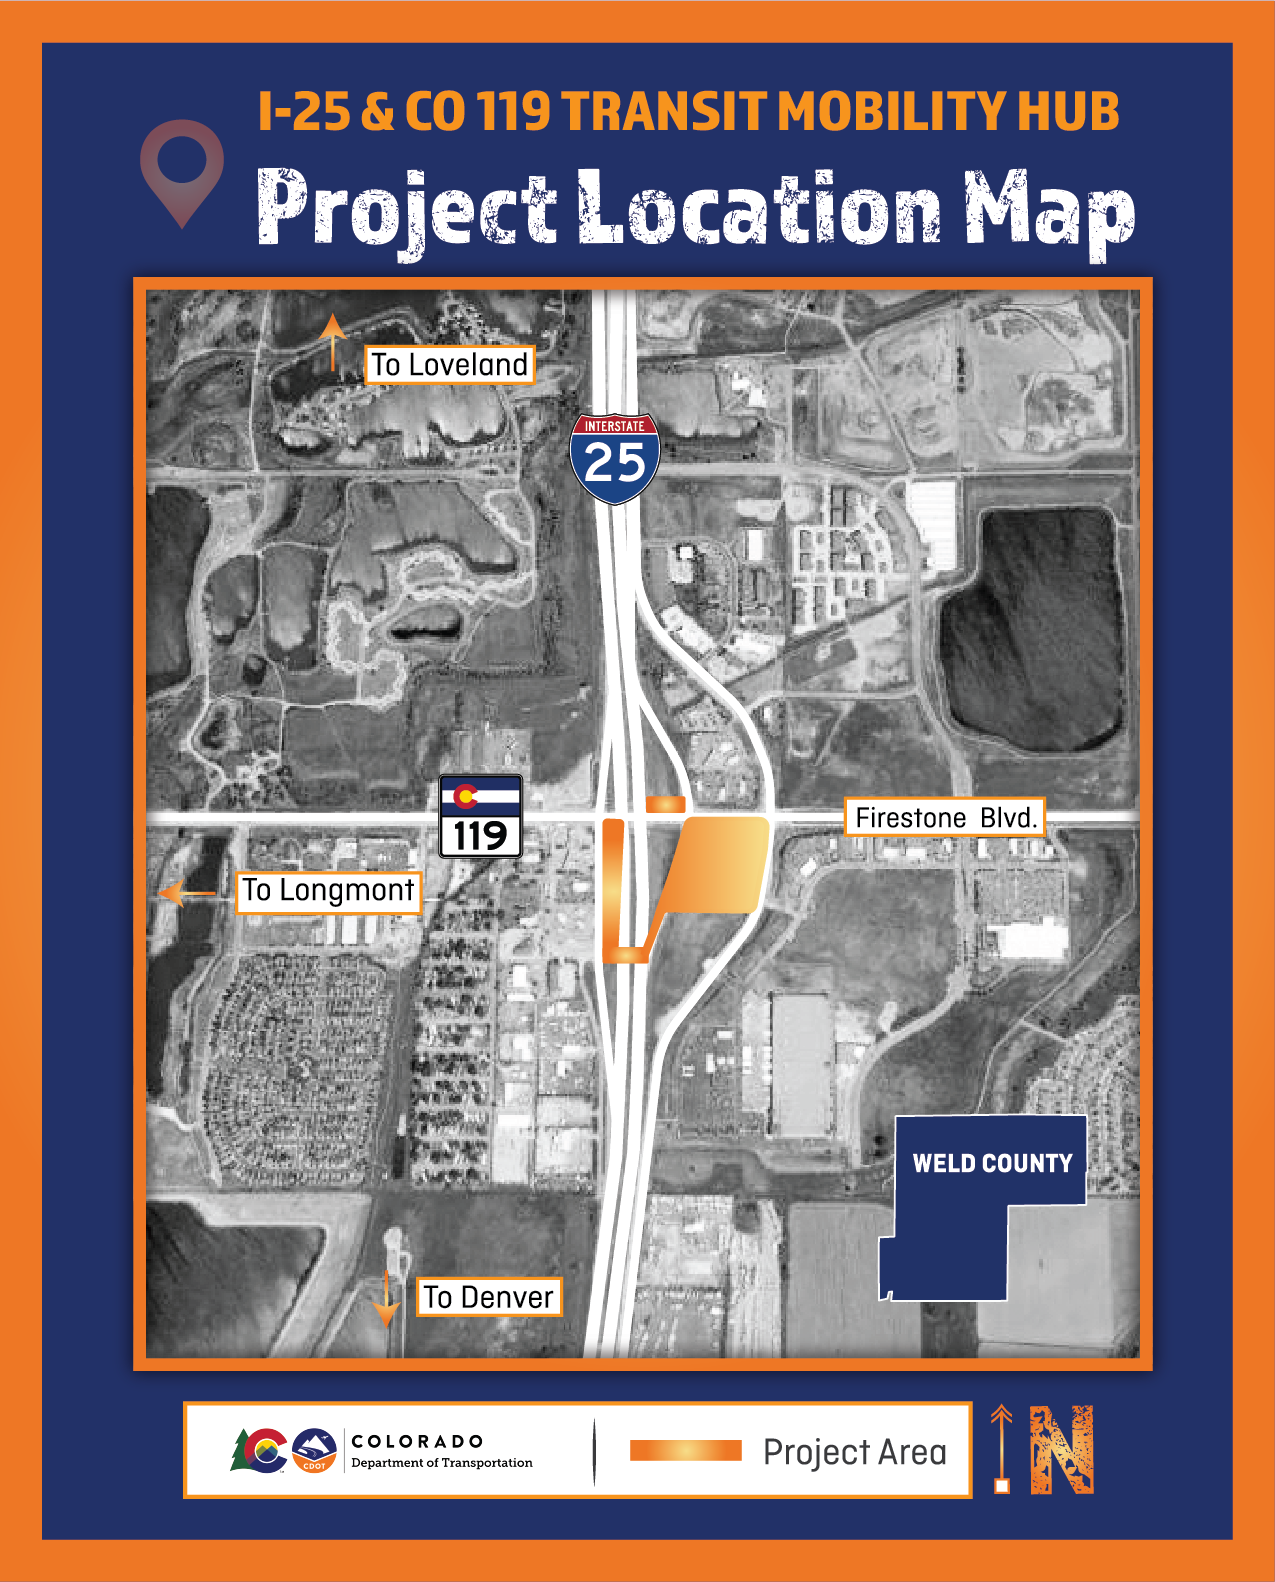 I-25 & CO 119 TRANSIT MOBILITY HUB Project Location Map v2 11.29.22-01.png detail image